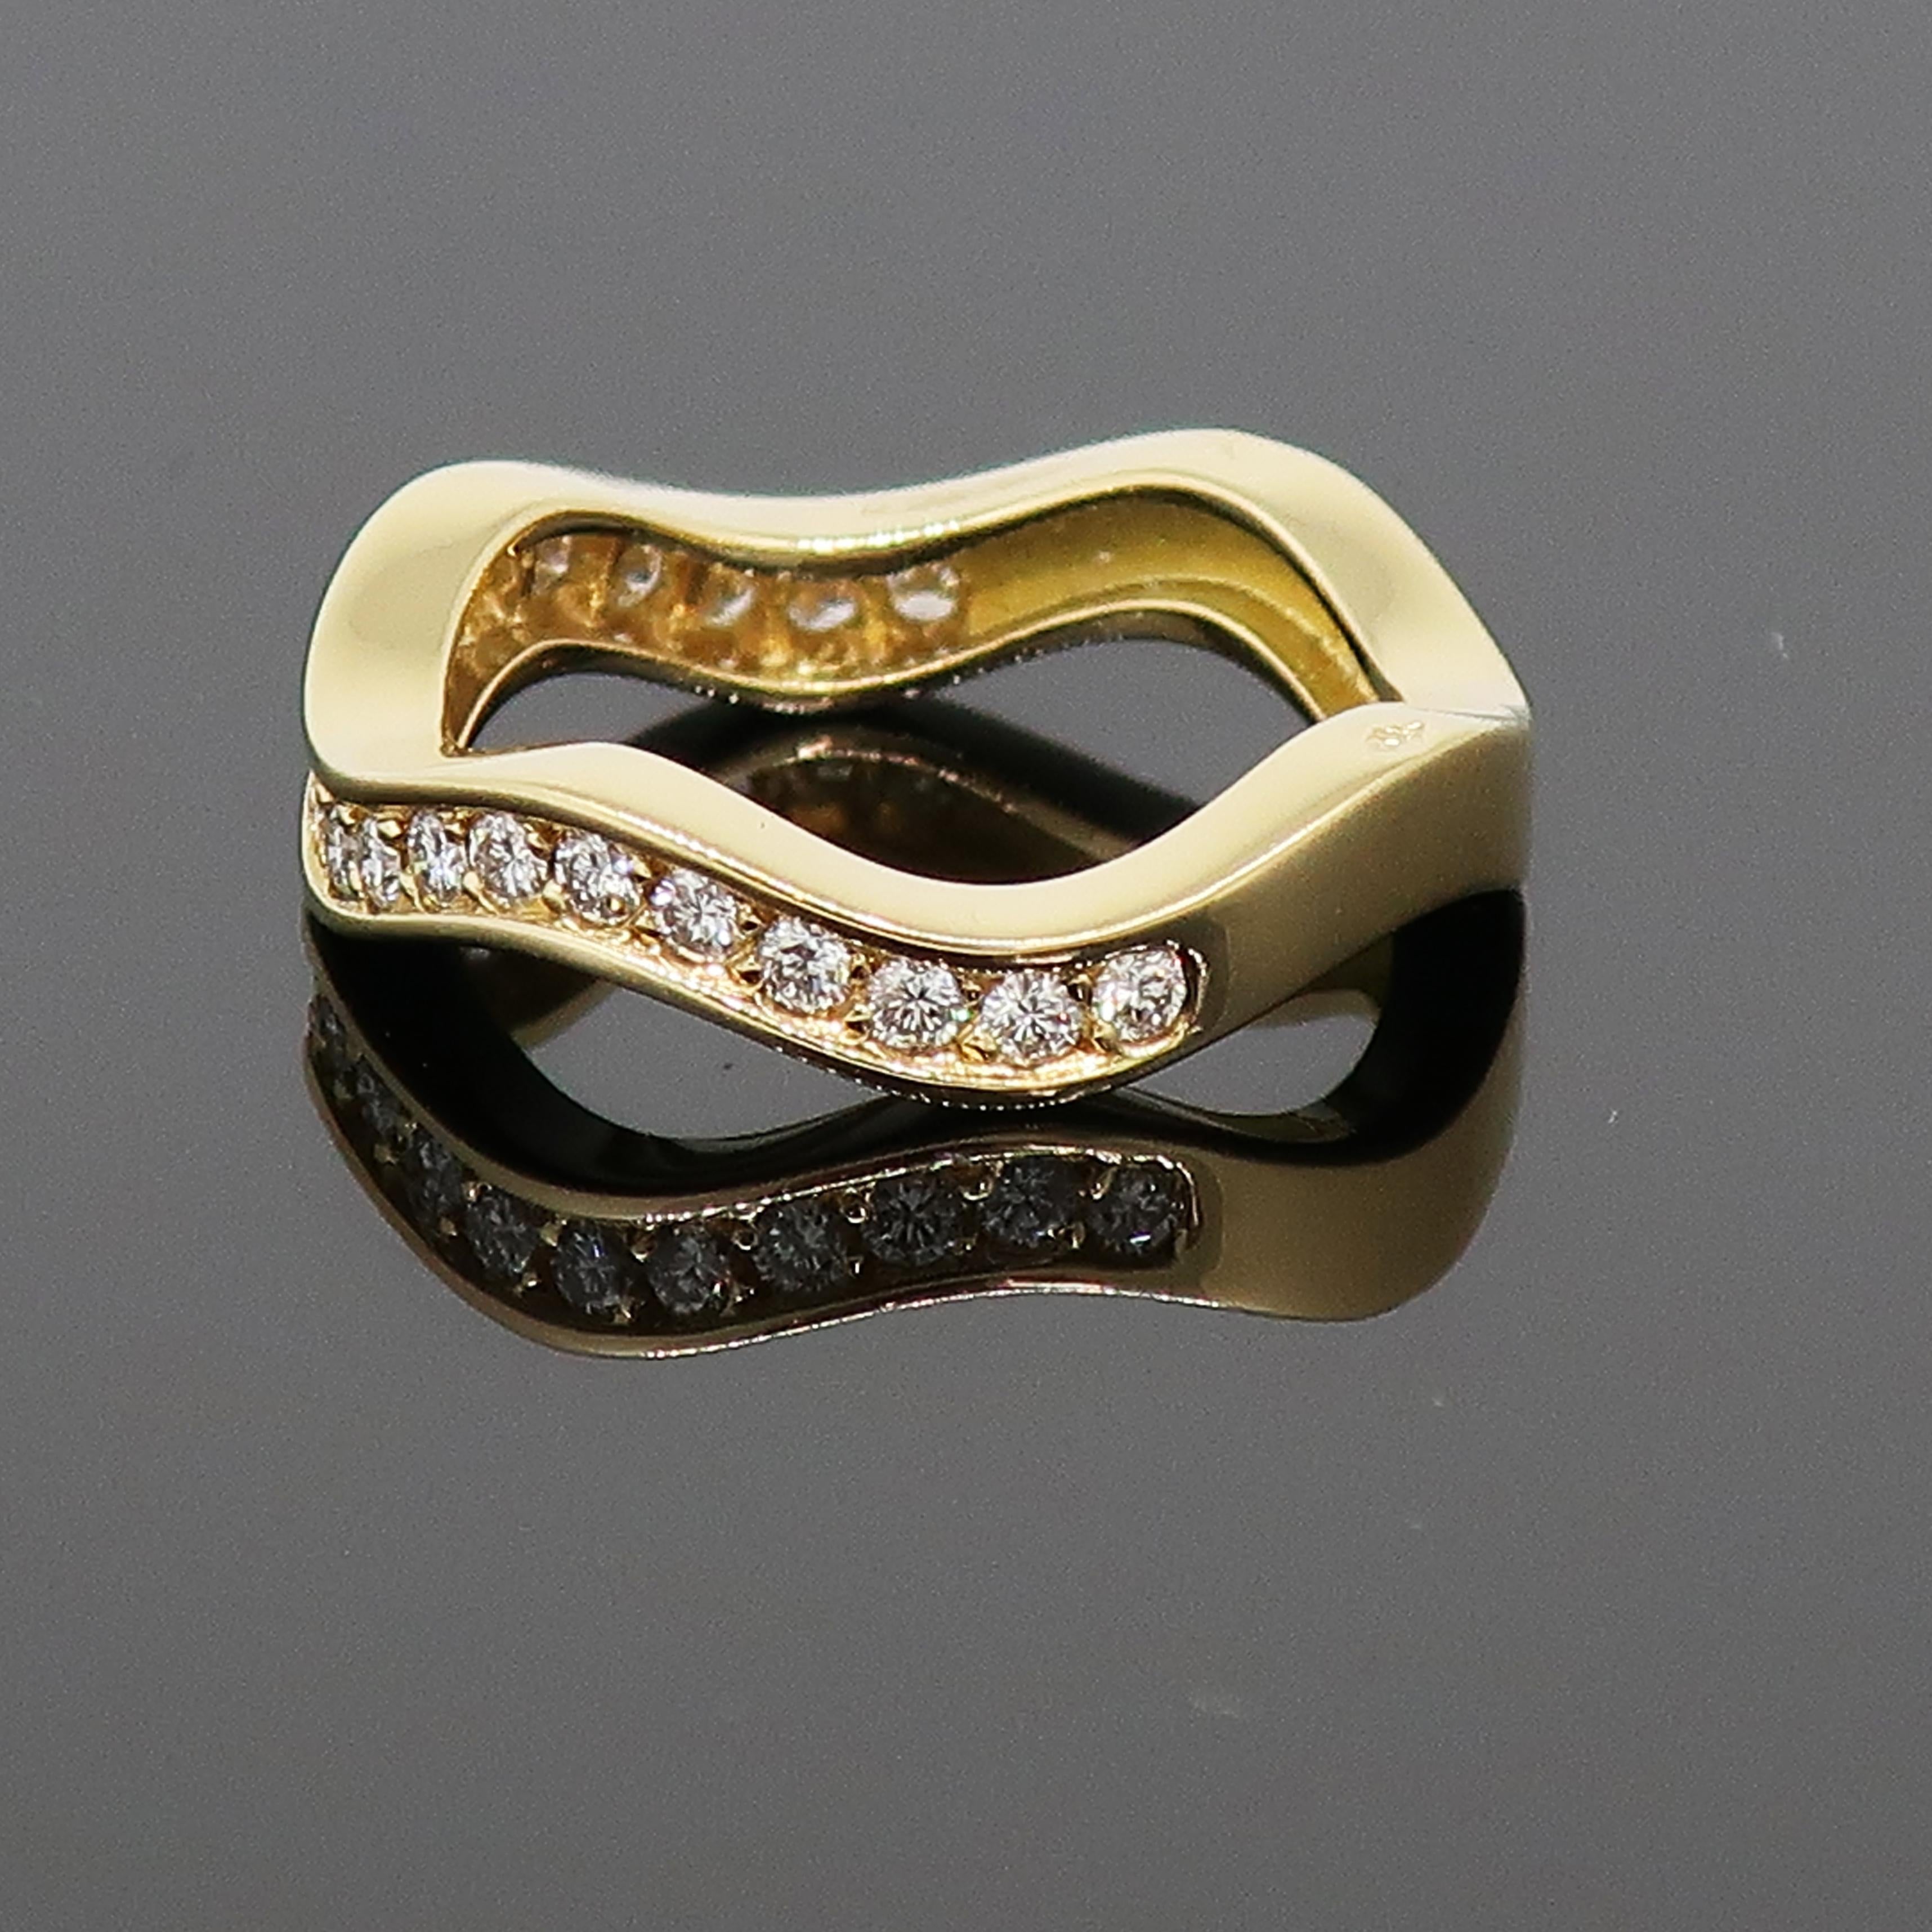 Cartier Diamond Wave Band Ring Set 18ct Yellow Gold In Excellent Condition For Sale In East Grinstead, GB